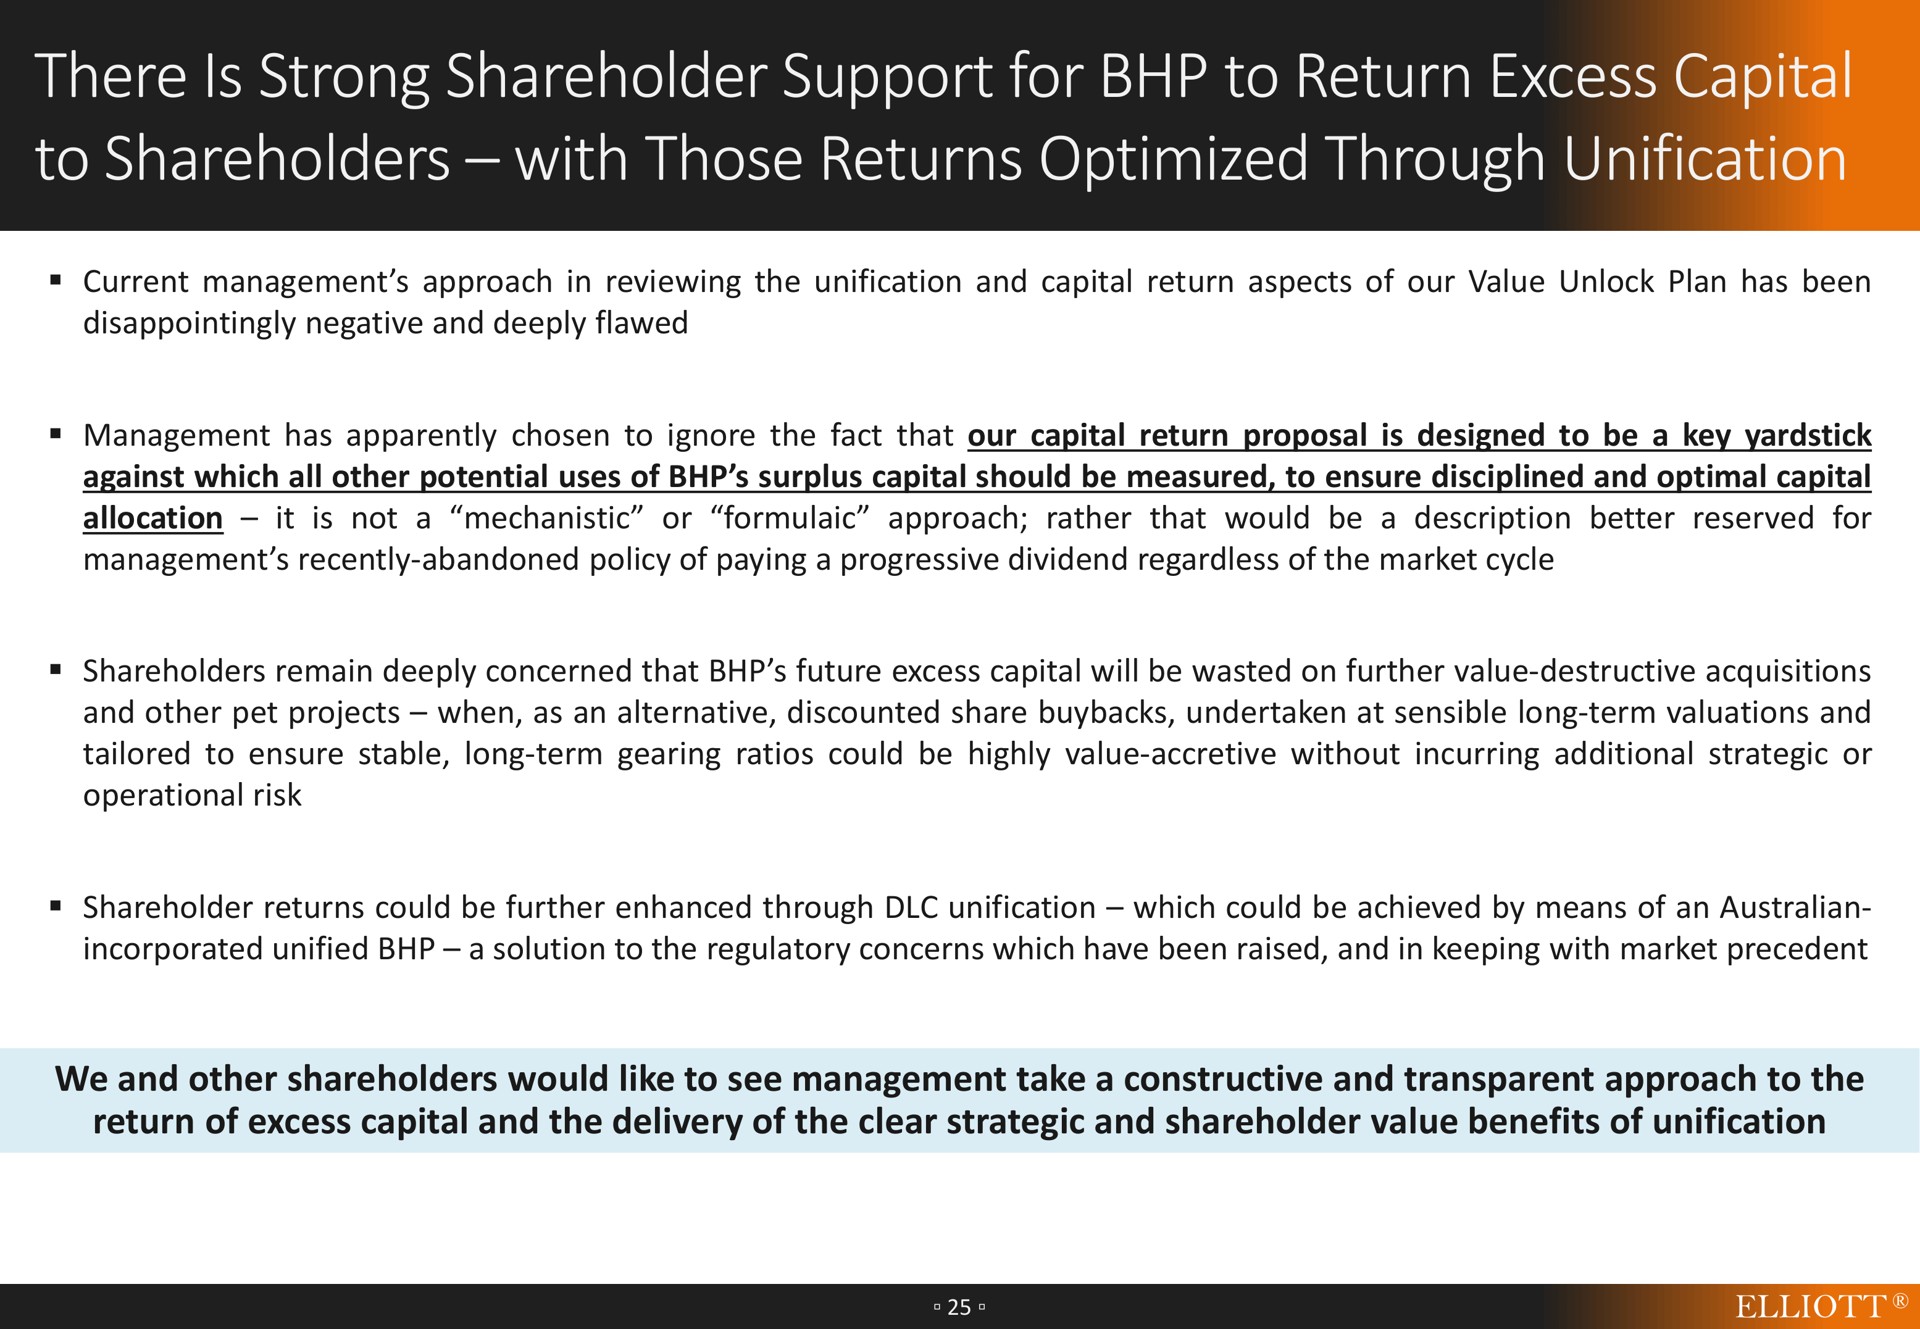 there is strong shareholder support for to return excess capital to shareholders with those returns optimized through unification | Elliott Management